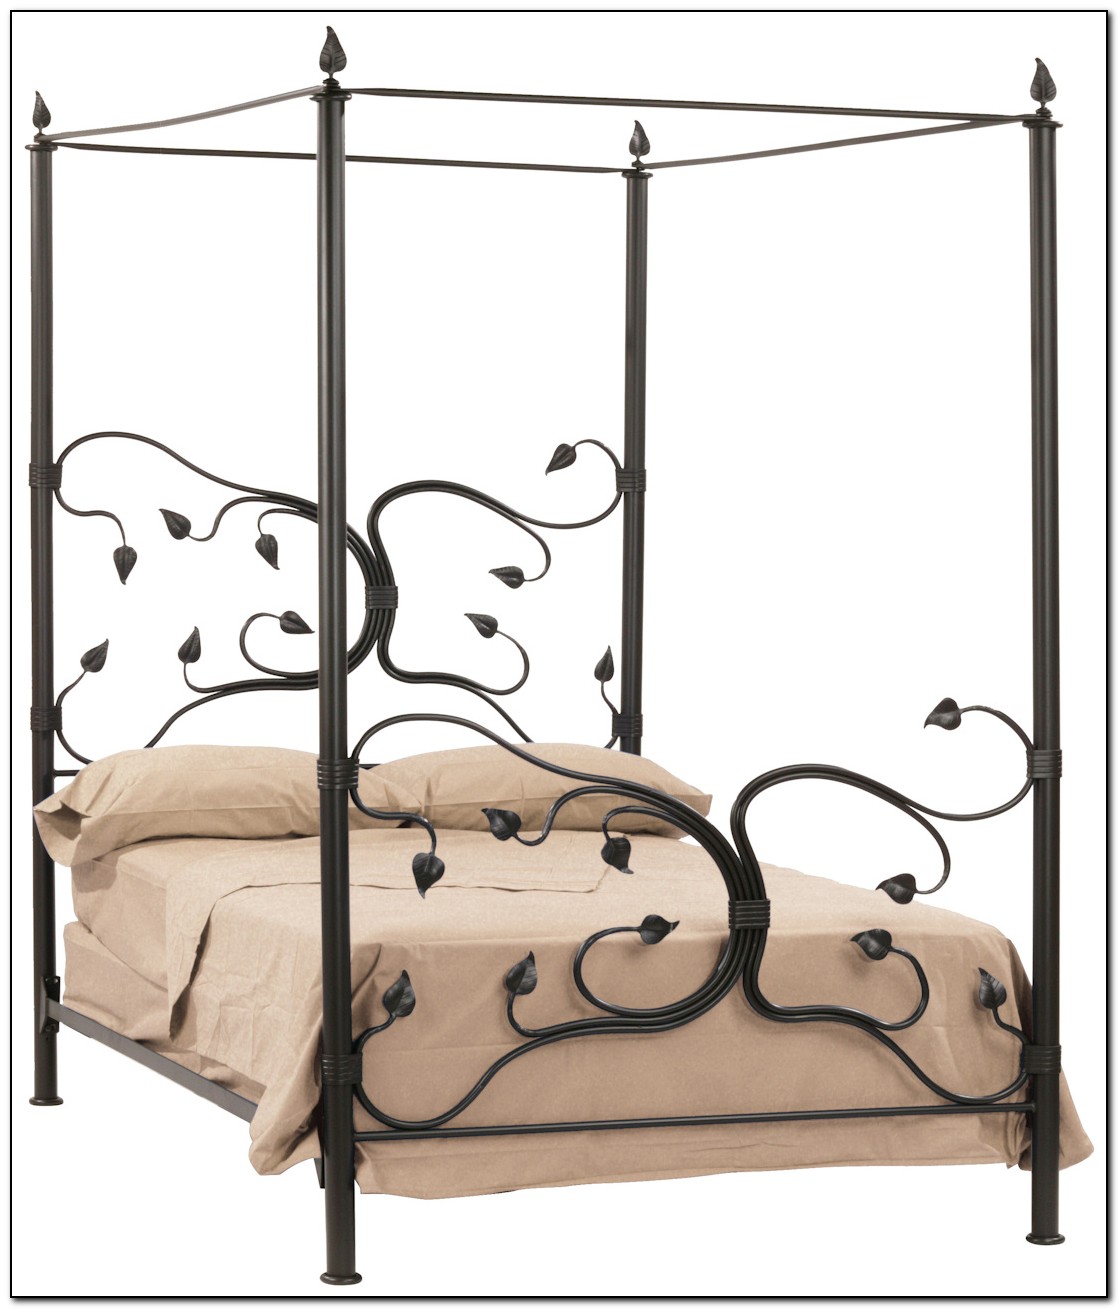 Wrought Iron Canopy Bed Frame